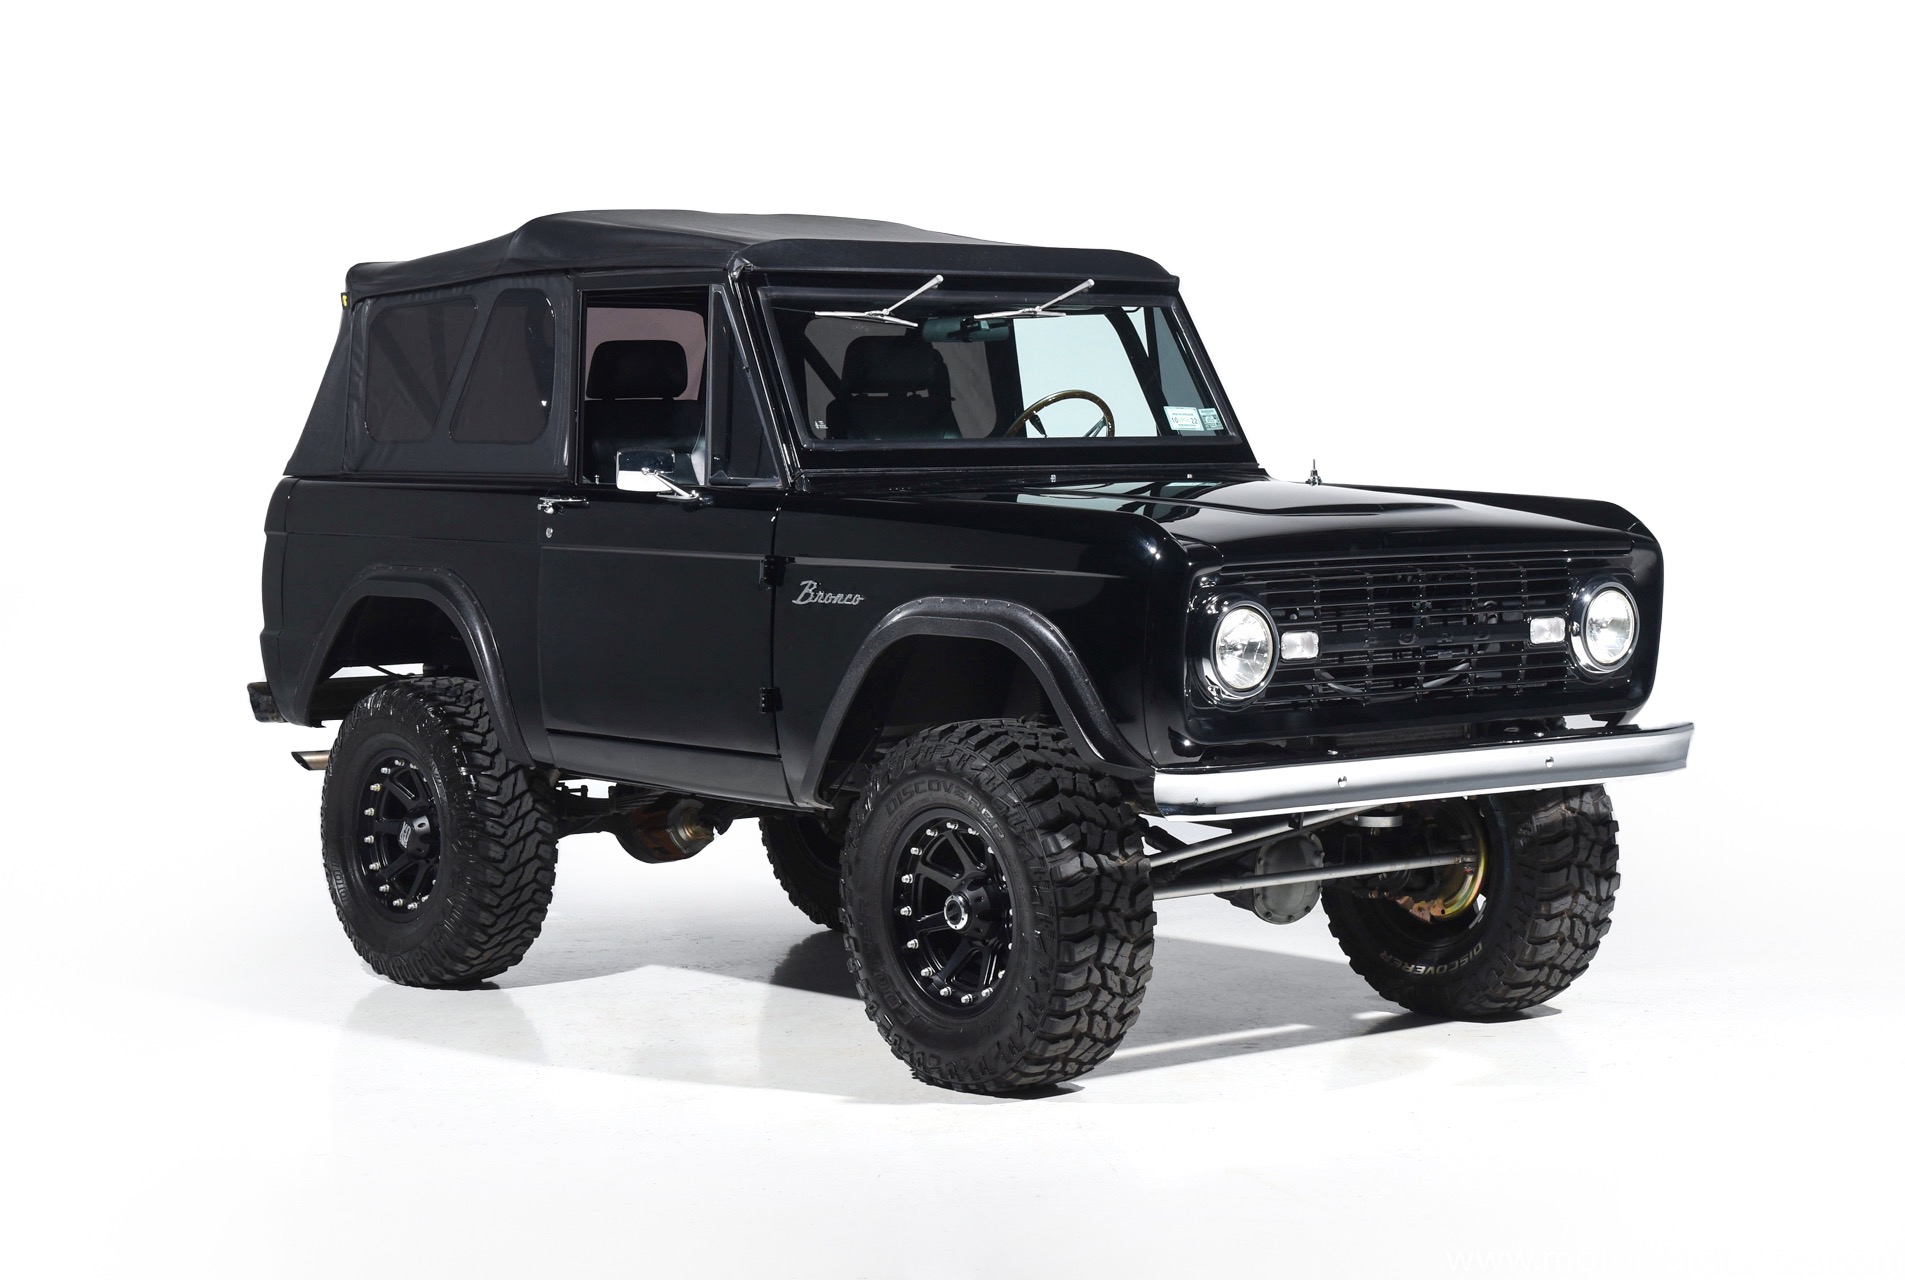 Used 1966 Ford Bronco For Sale 99900 Motorcar Classics Stock 2408